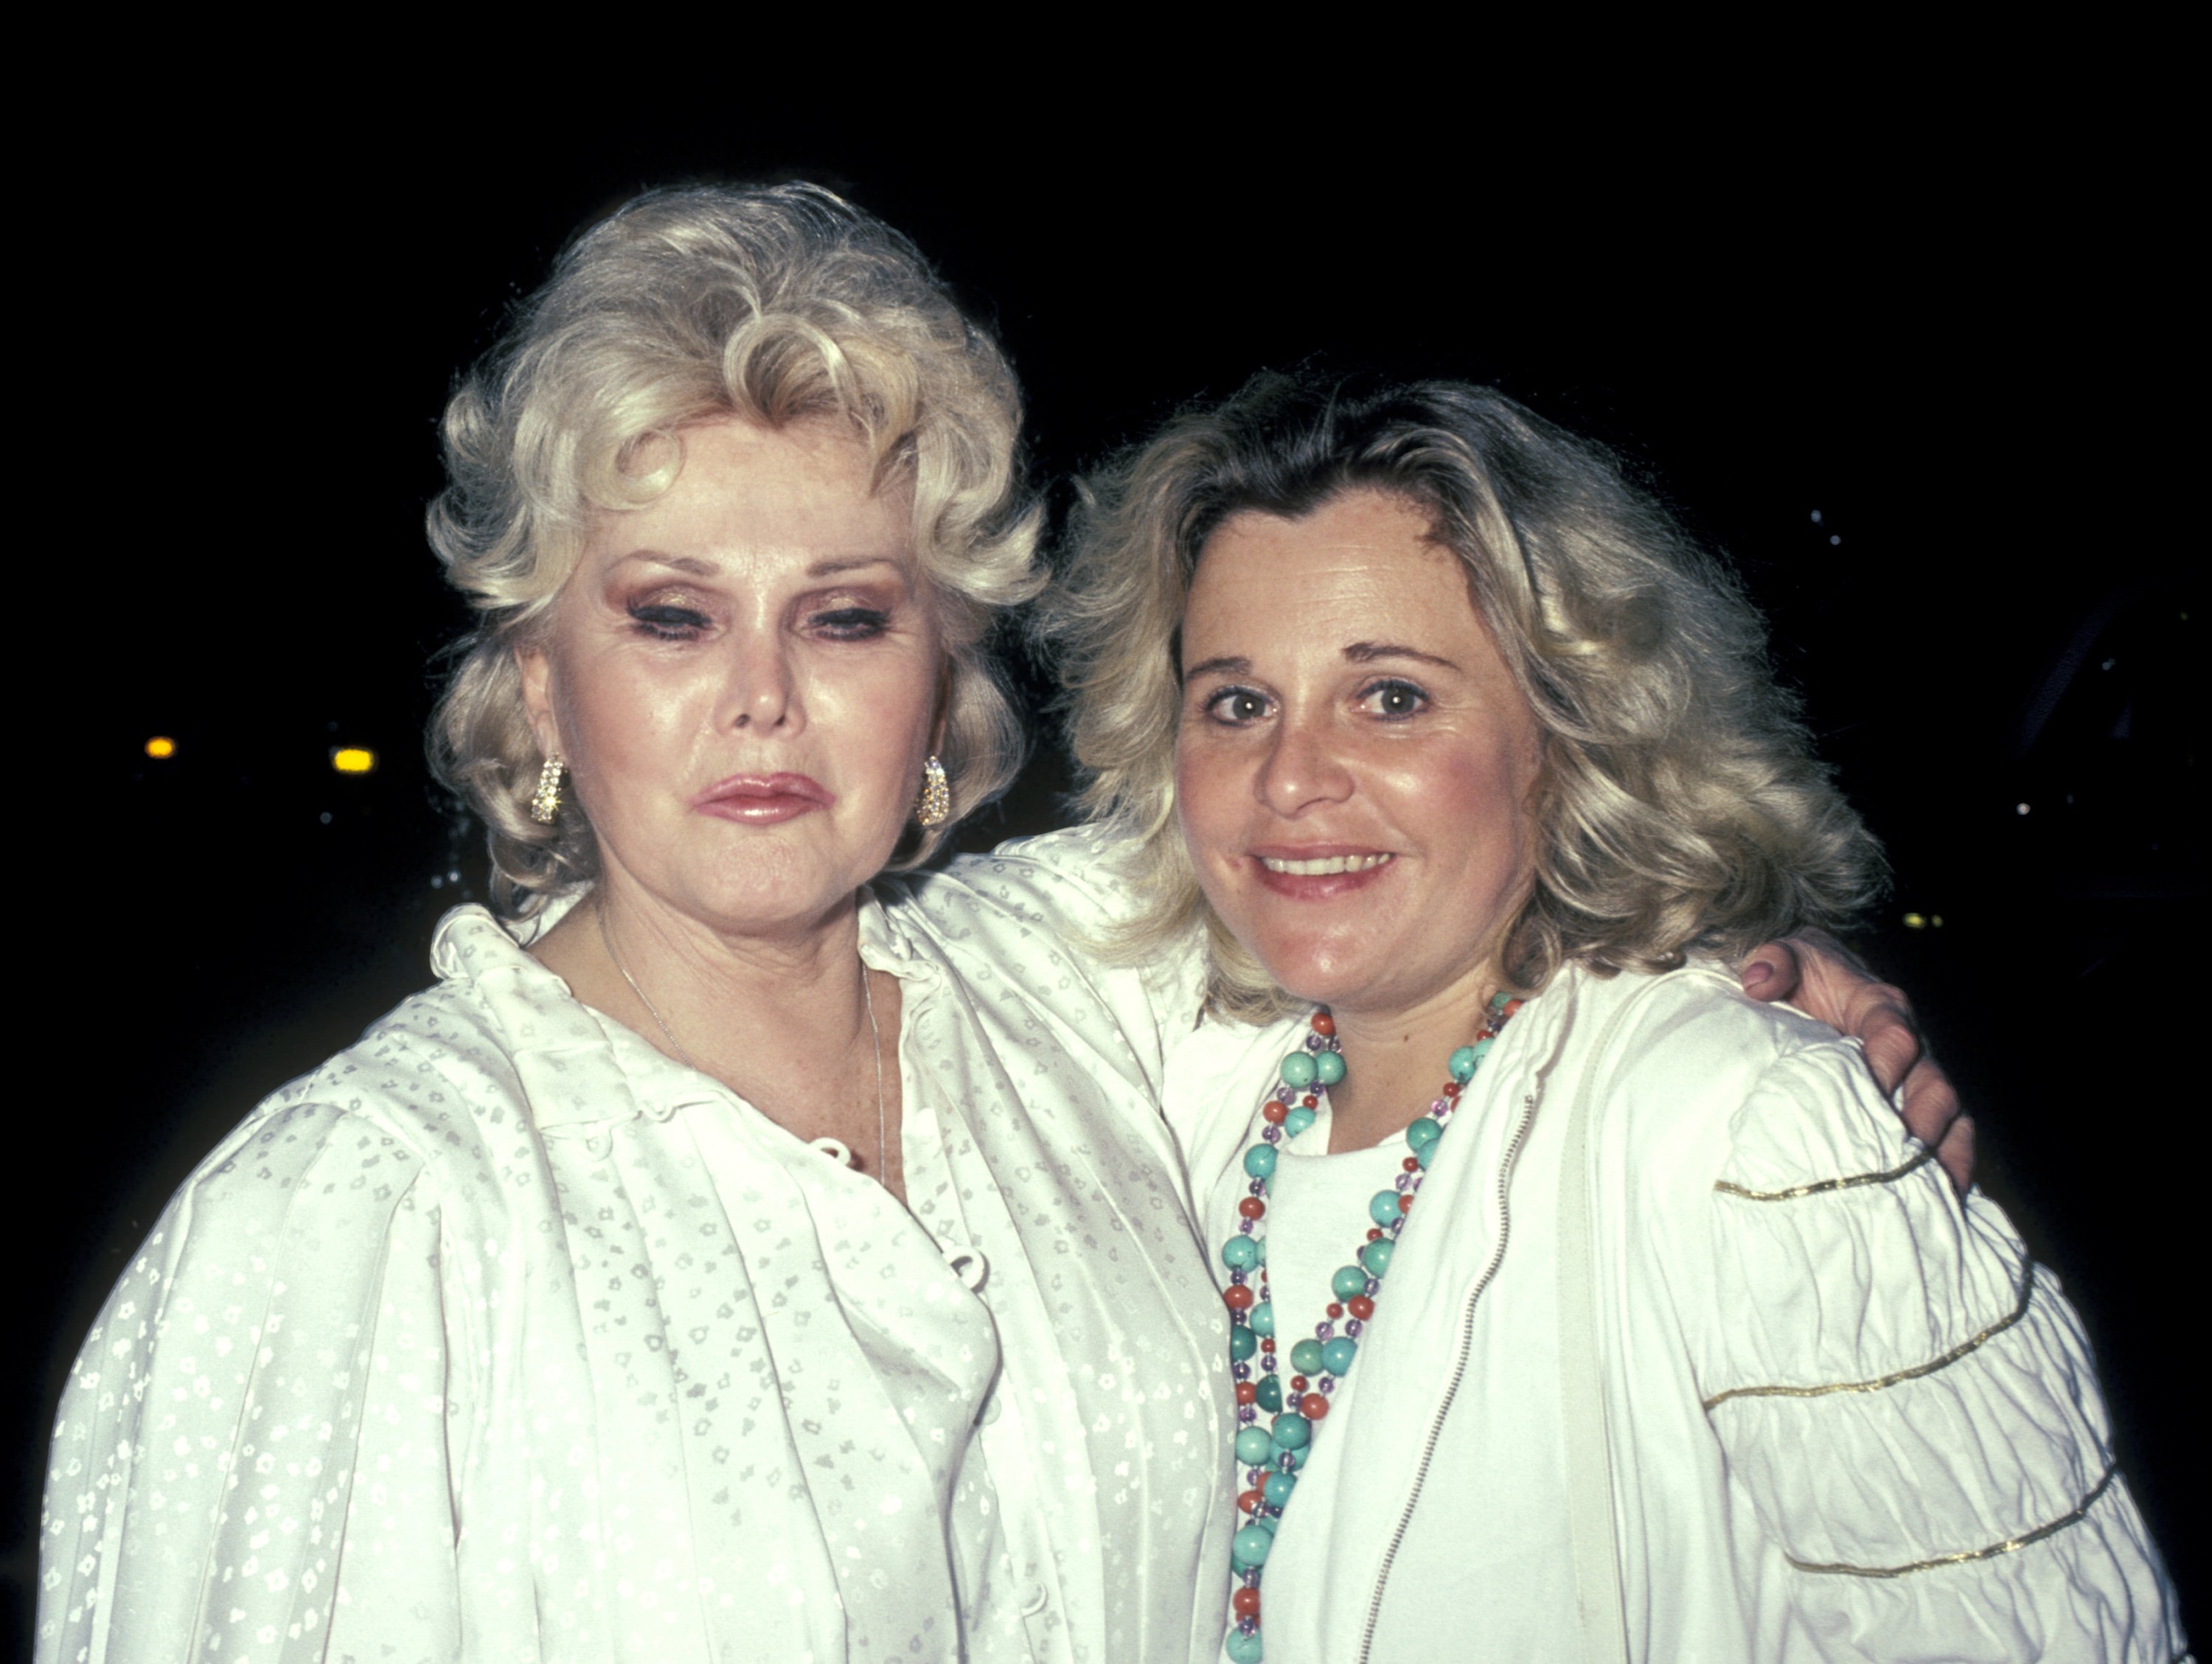 Zsa Zsa Gabor and Francesca Hilton during a sighting on August 16, 1983. | Source: Ron Galella/Ron Galella Collection/Getty Images